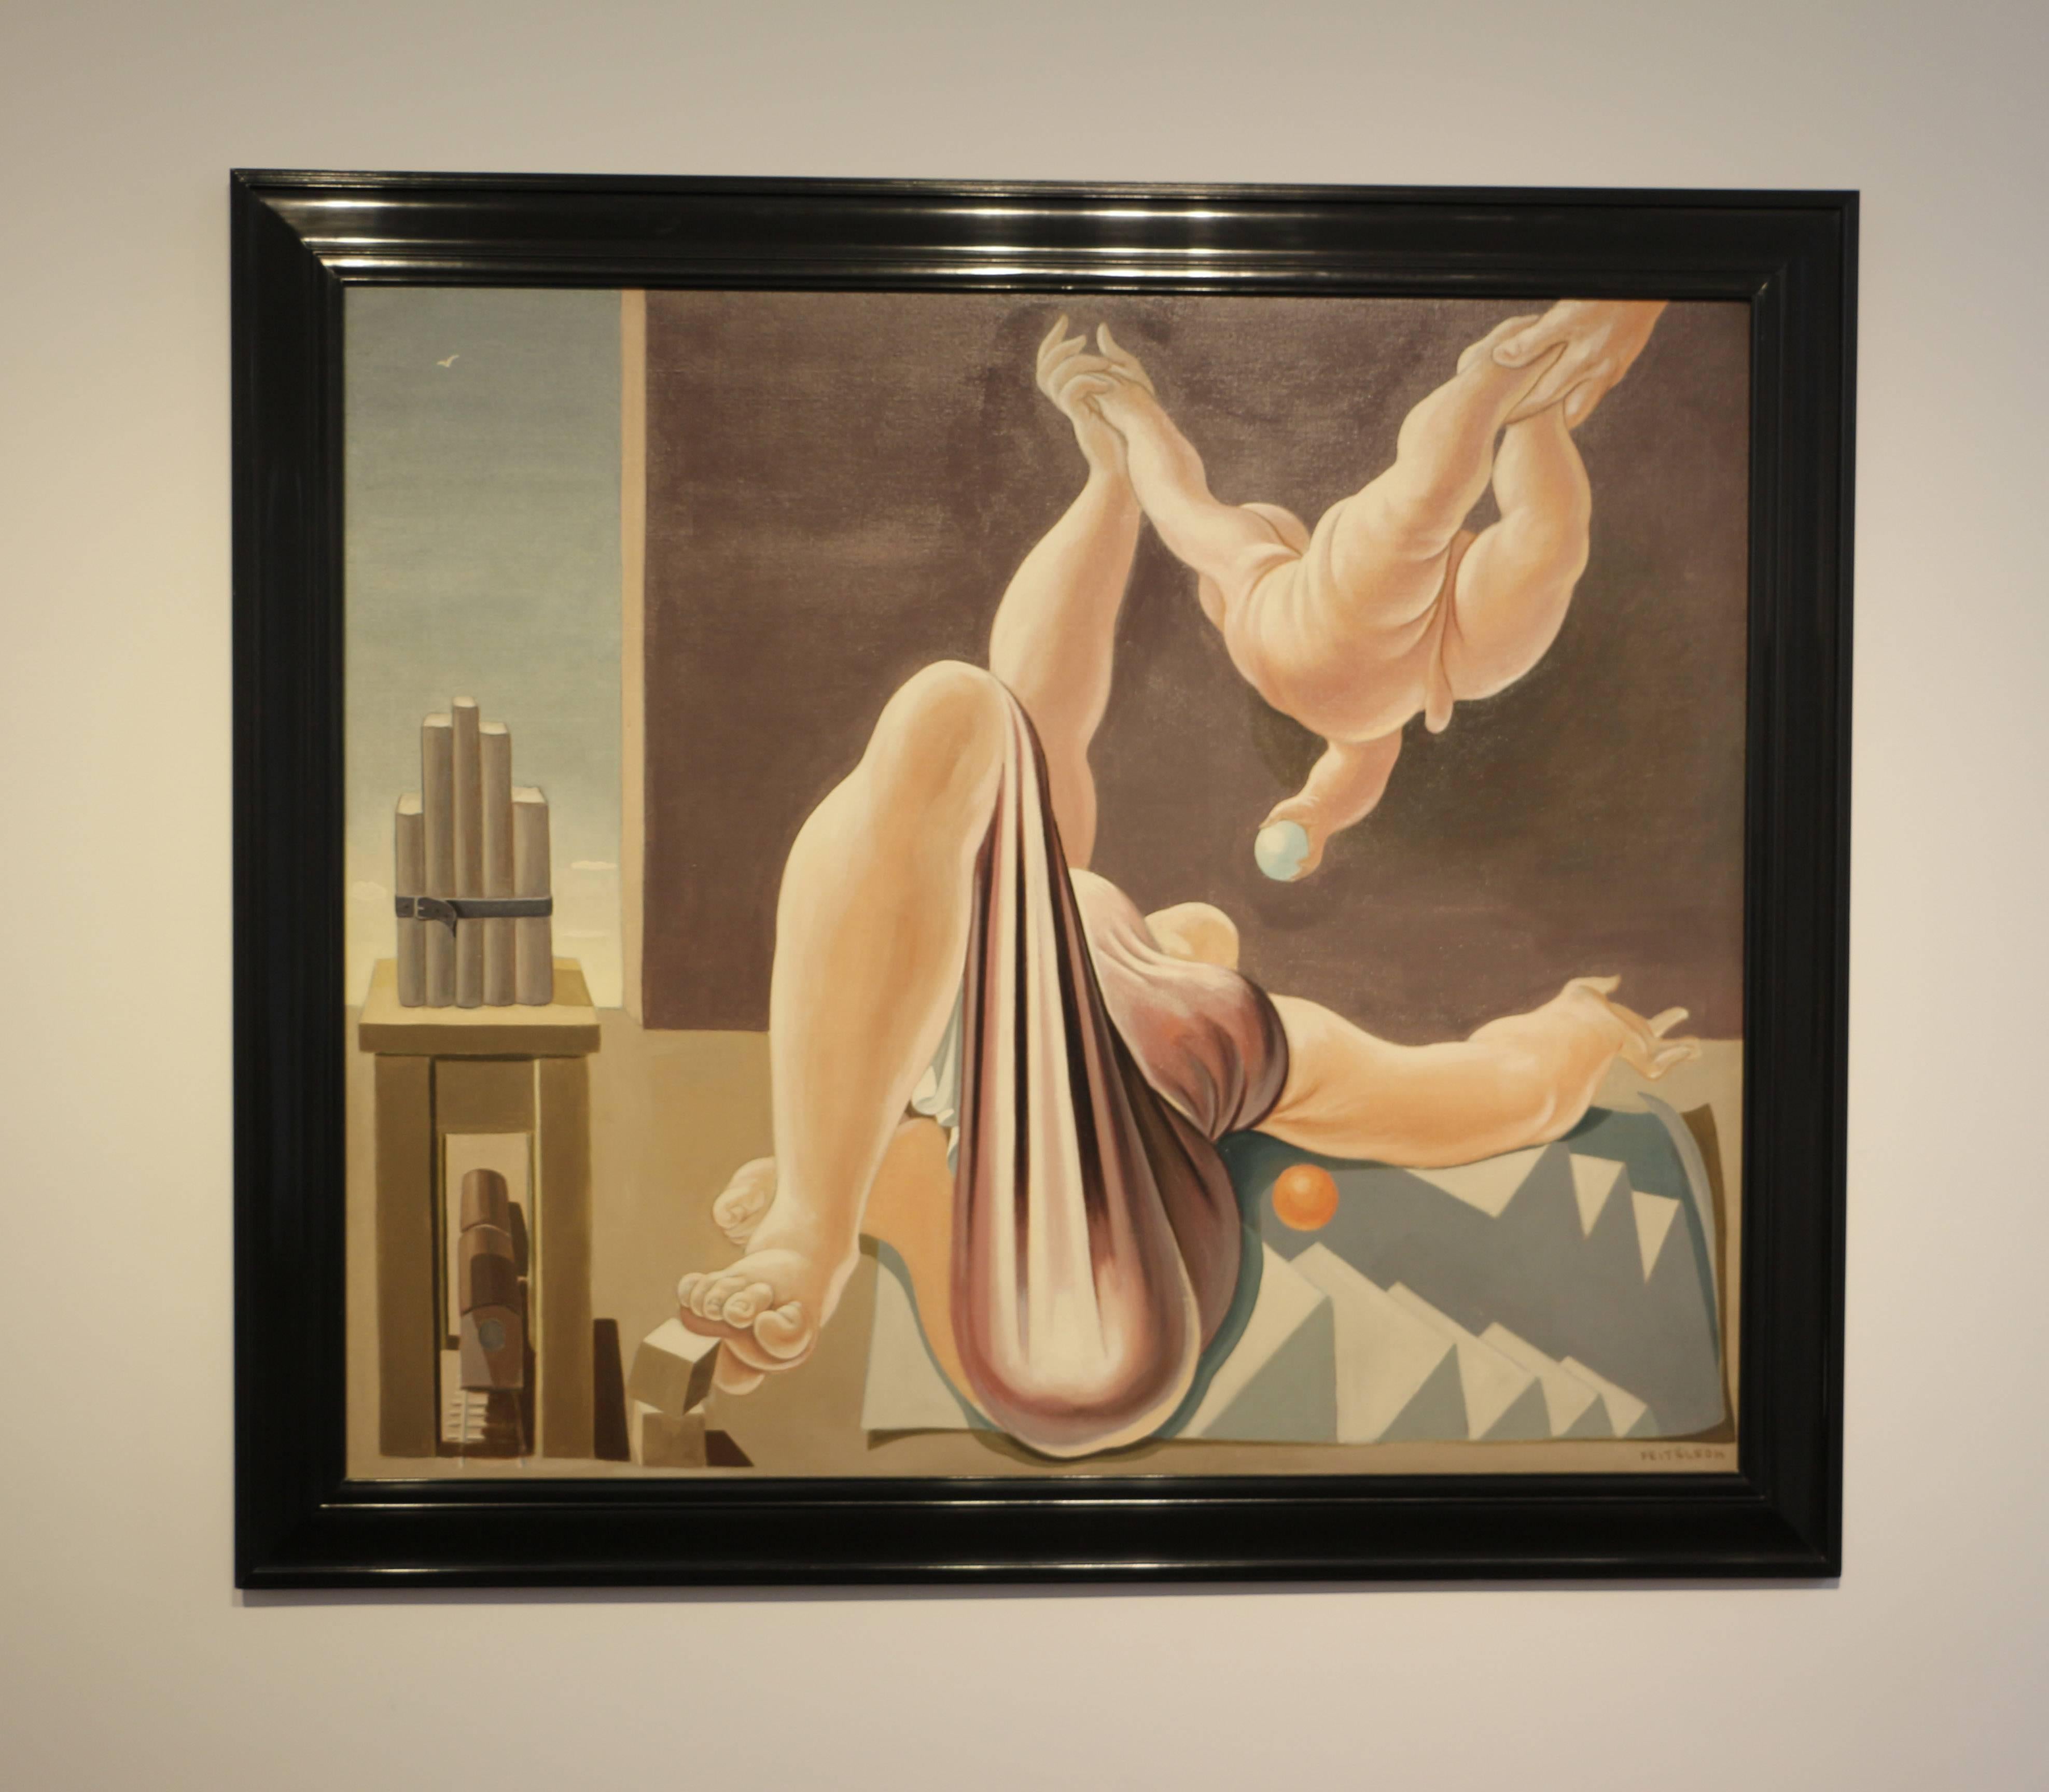 Flight over New York at Twilight, large oil painting of mother and child playing - Painting by Lorser Feitelson